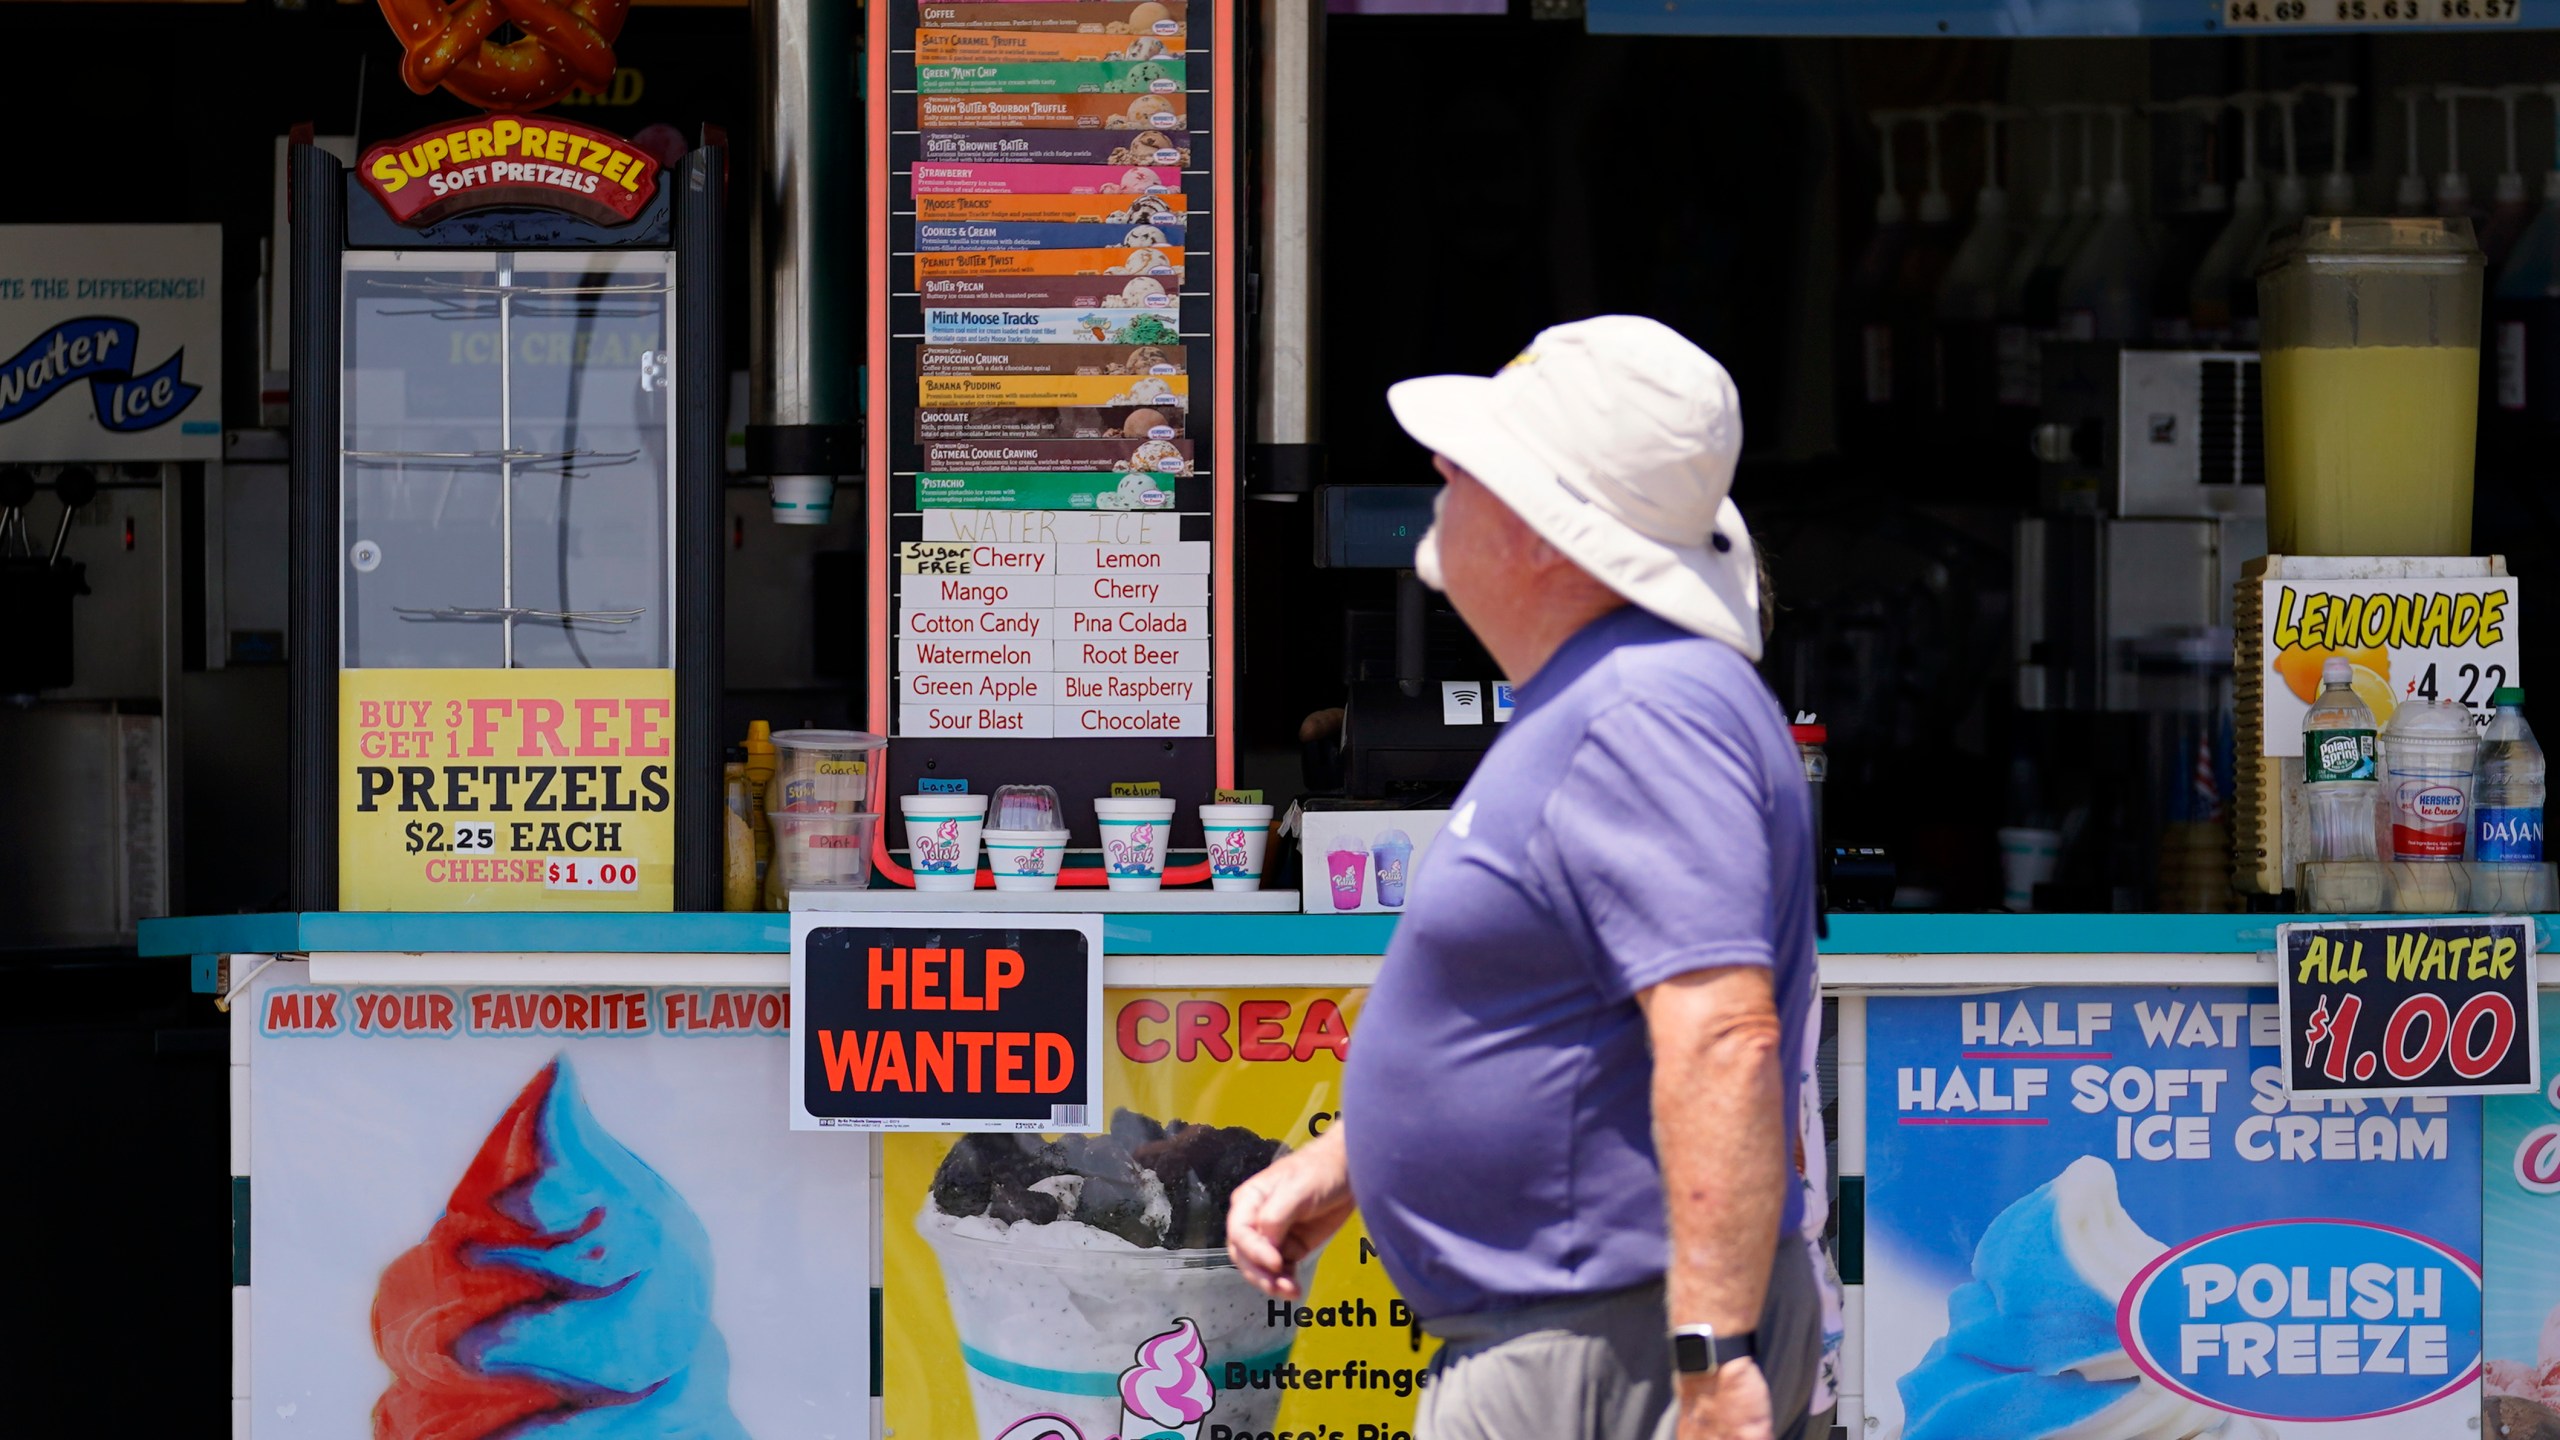 FILE - A person walks past an ice cream stand on the boardwalk, Thursday, June 2, 2022, in Ocean City, N.J. A type of bankruptcy protection filing that made it easier for small businesses to seek relief has expired, which will complicate filing for small businesses with more than $3 million in debt. (AP Photo/Matt Slocum, File)